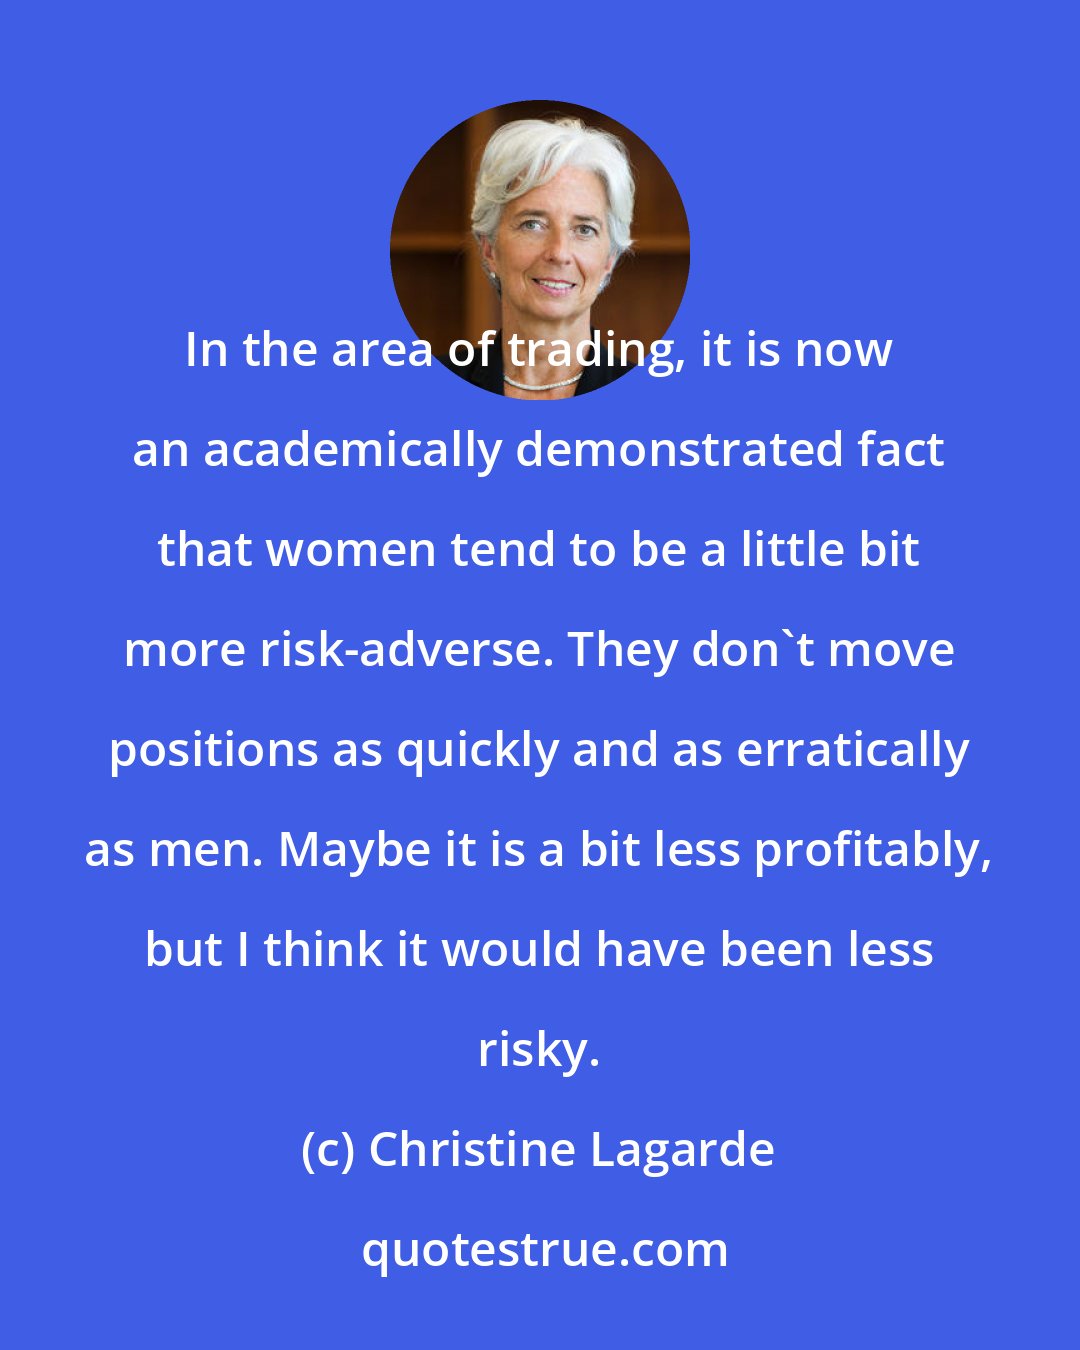 Christine Lagarde: In the area of trading, it is now an academically demonstrated fact that women tend to be a little bit more risk-adverse. They don't move positions as quickly and as erratically as men. Maybe it is a bit less profitably, but I think it would have been less risky.